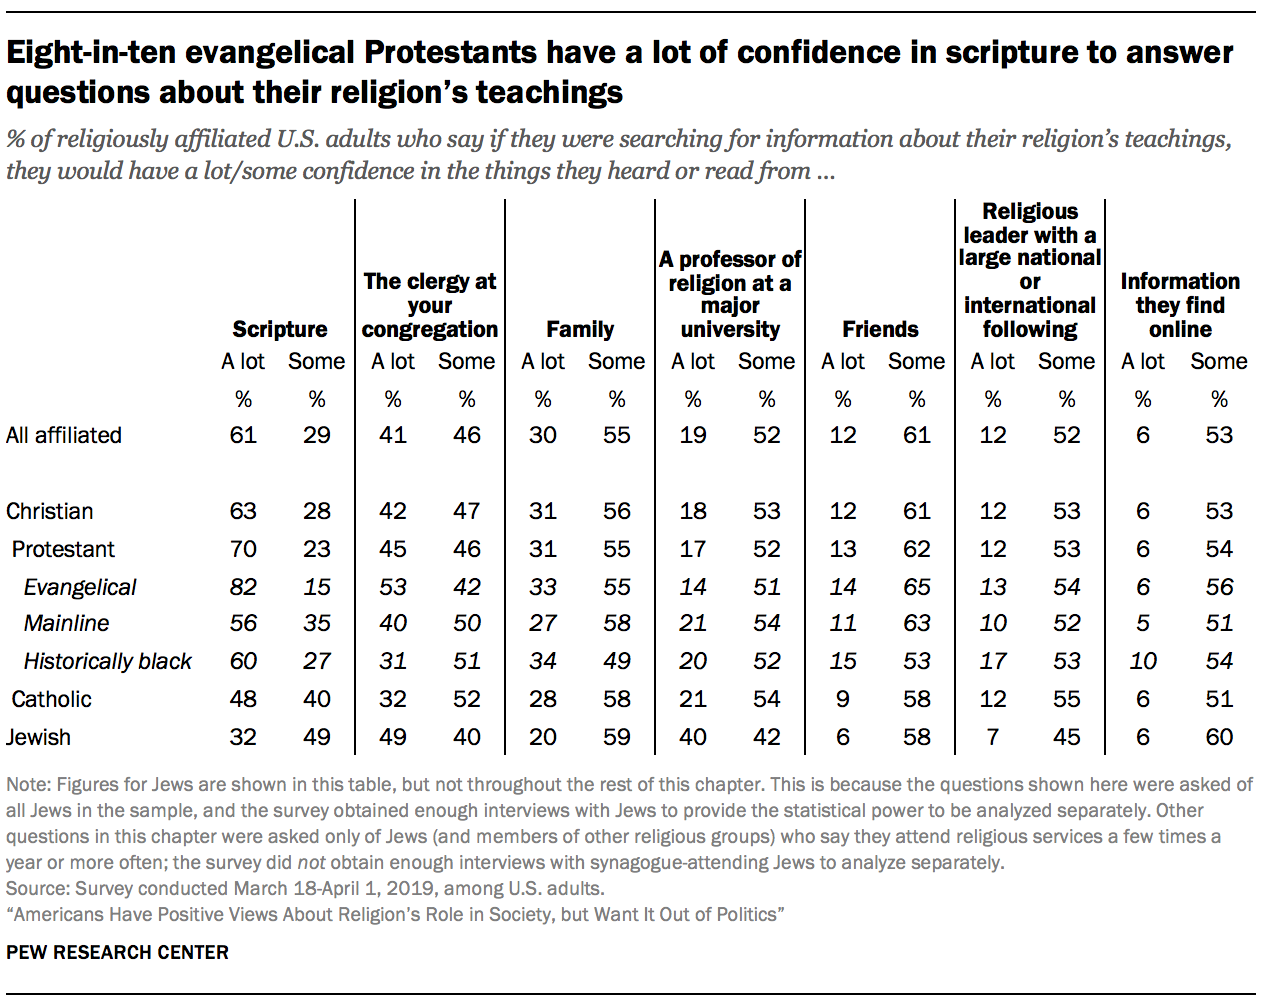 Eight-in-ten evangelical Protestants have a lot of confidence in scripture to answer questions about their religion's teachings